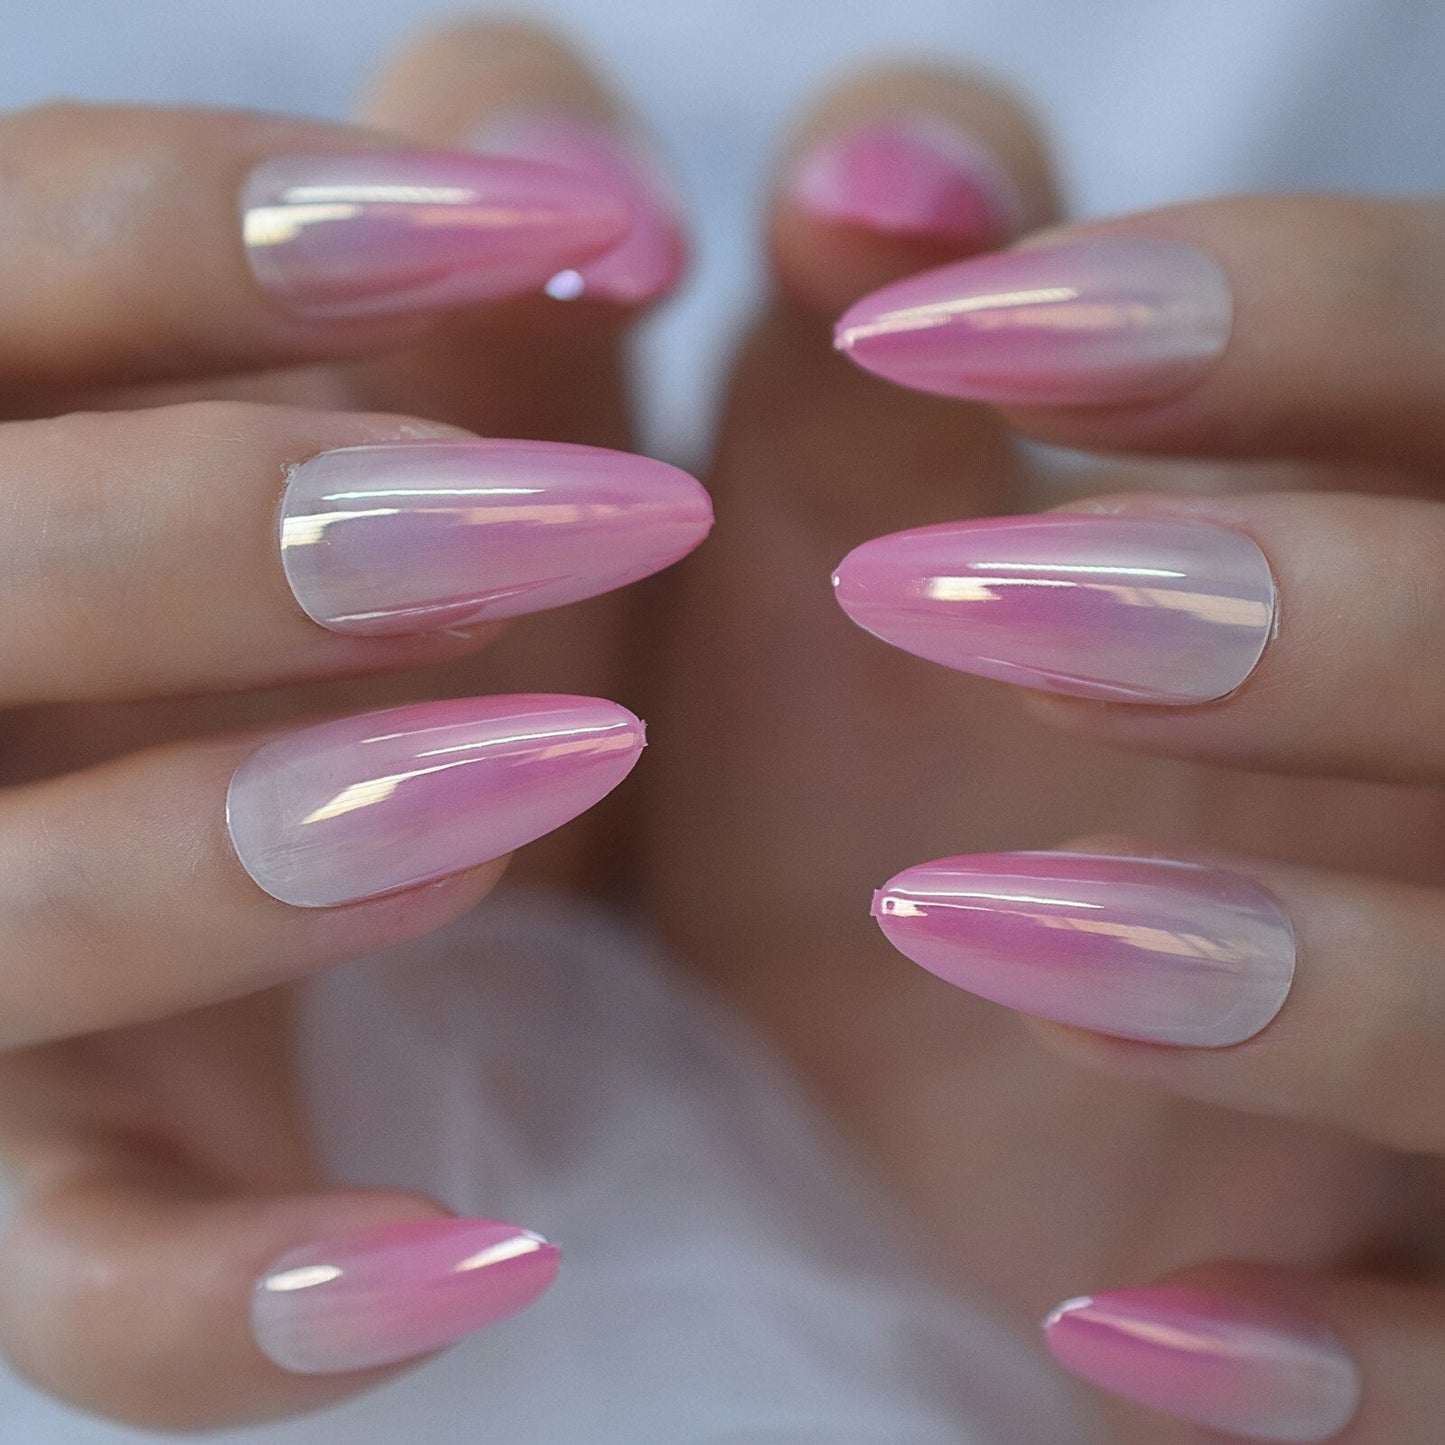 Glossy Gradient Rainbow Ombre French Press on Nails Almond Fake Nails Stiletto Oval Pointed Manicure False Nails Finger Tips